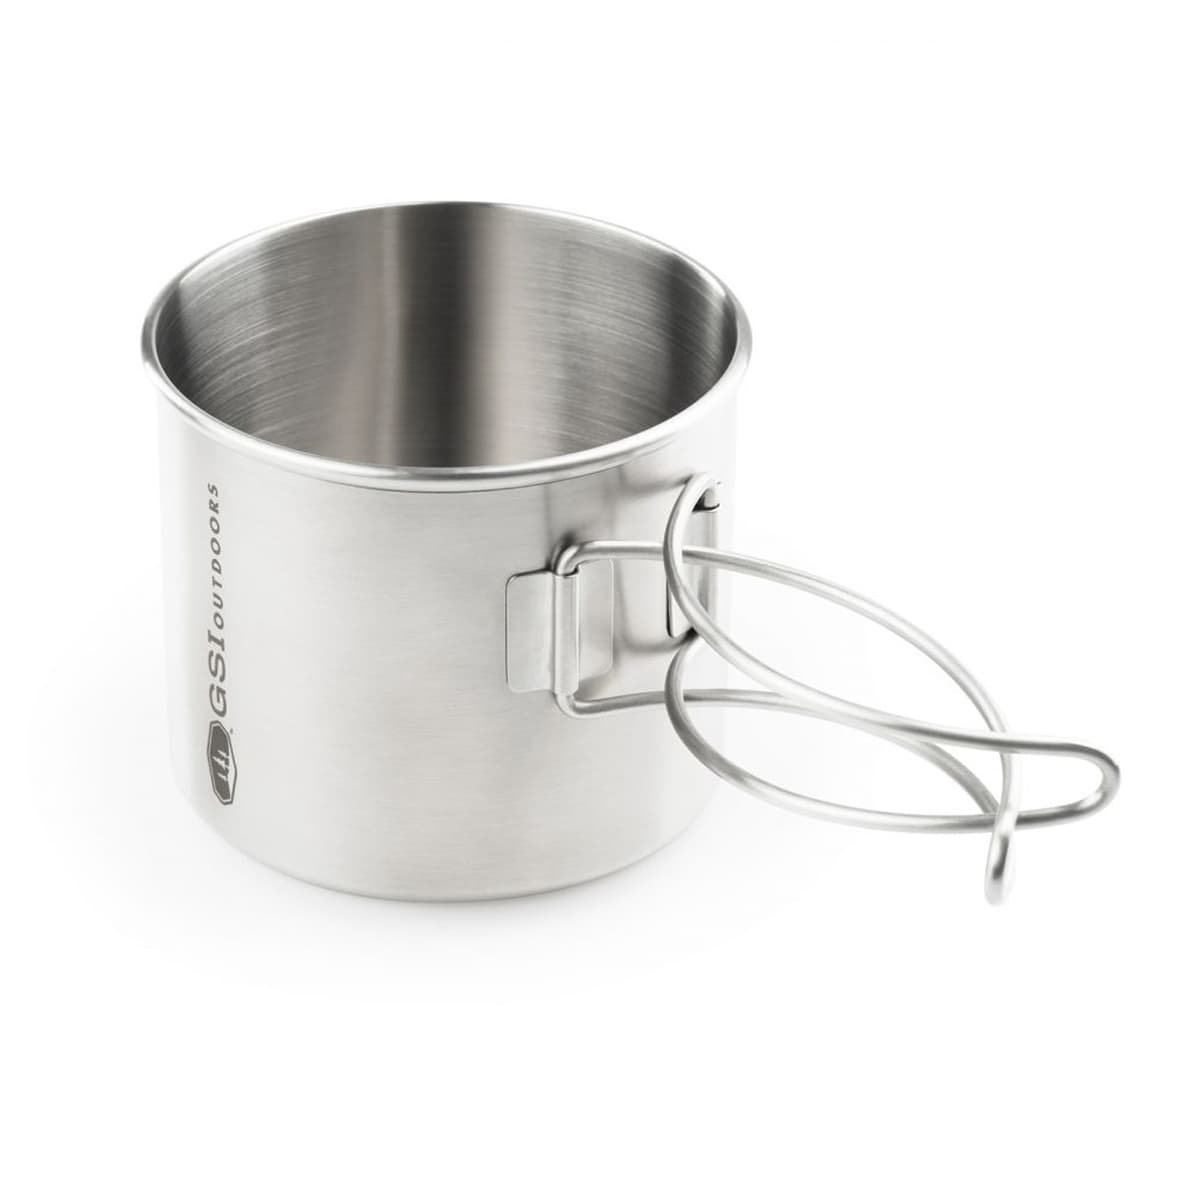 Stainless Steel Bottle Cup / Pot